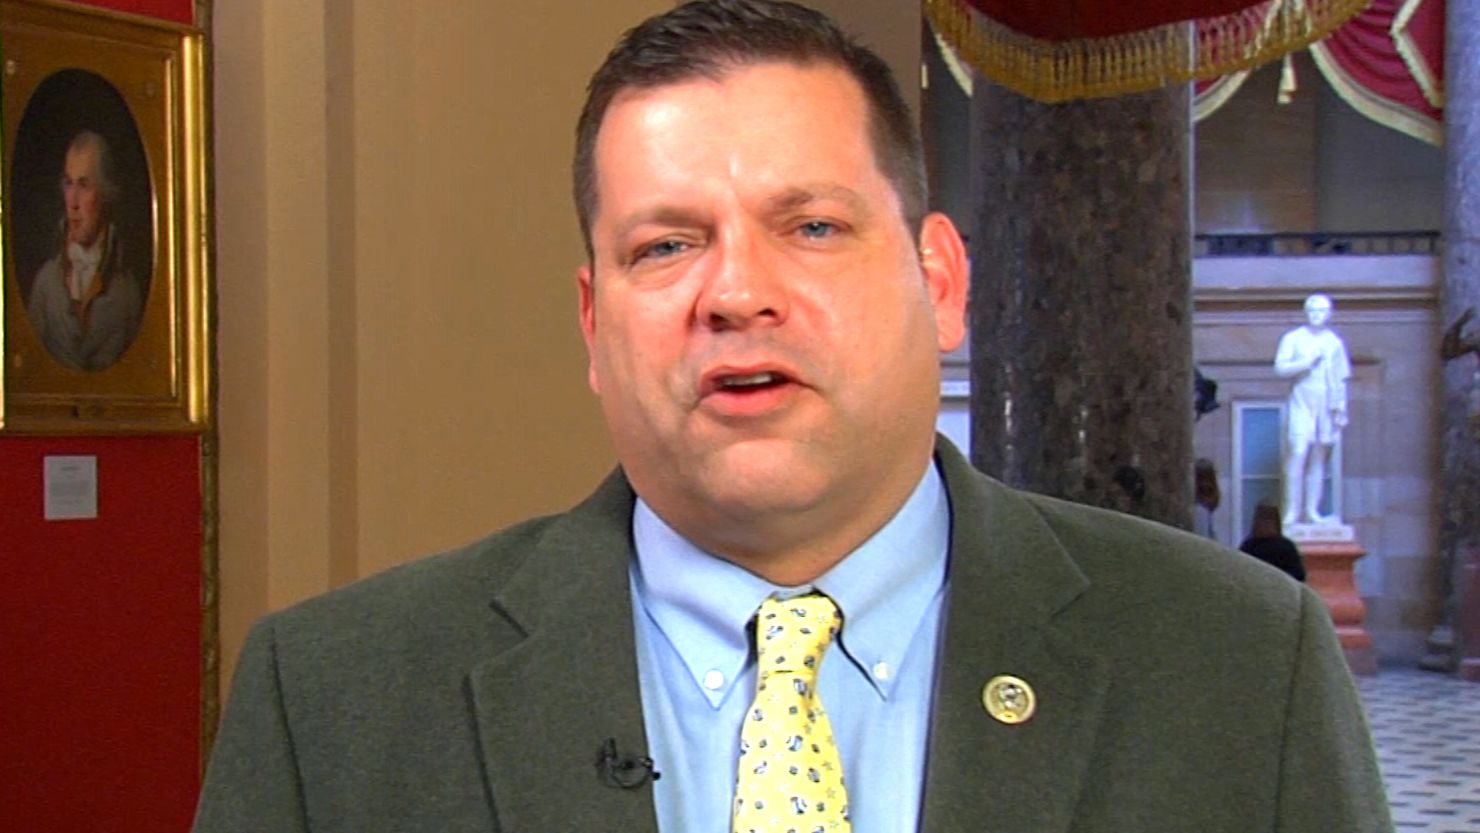 Rep. Tom Garrett, a Virginia Republican, says he's running for re-election 